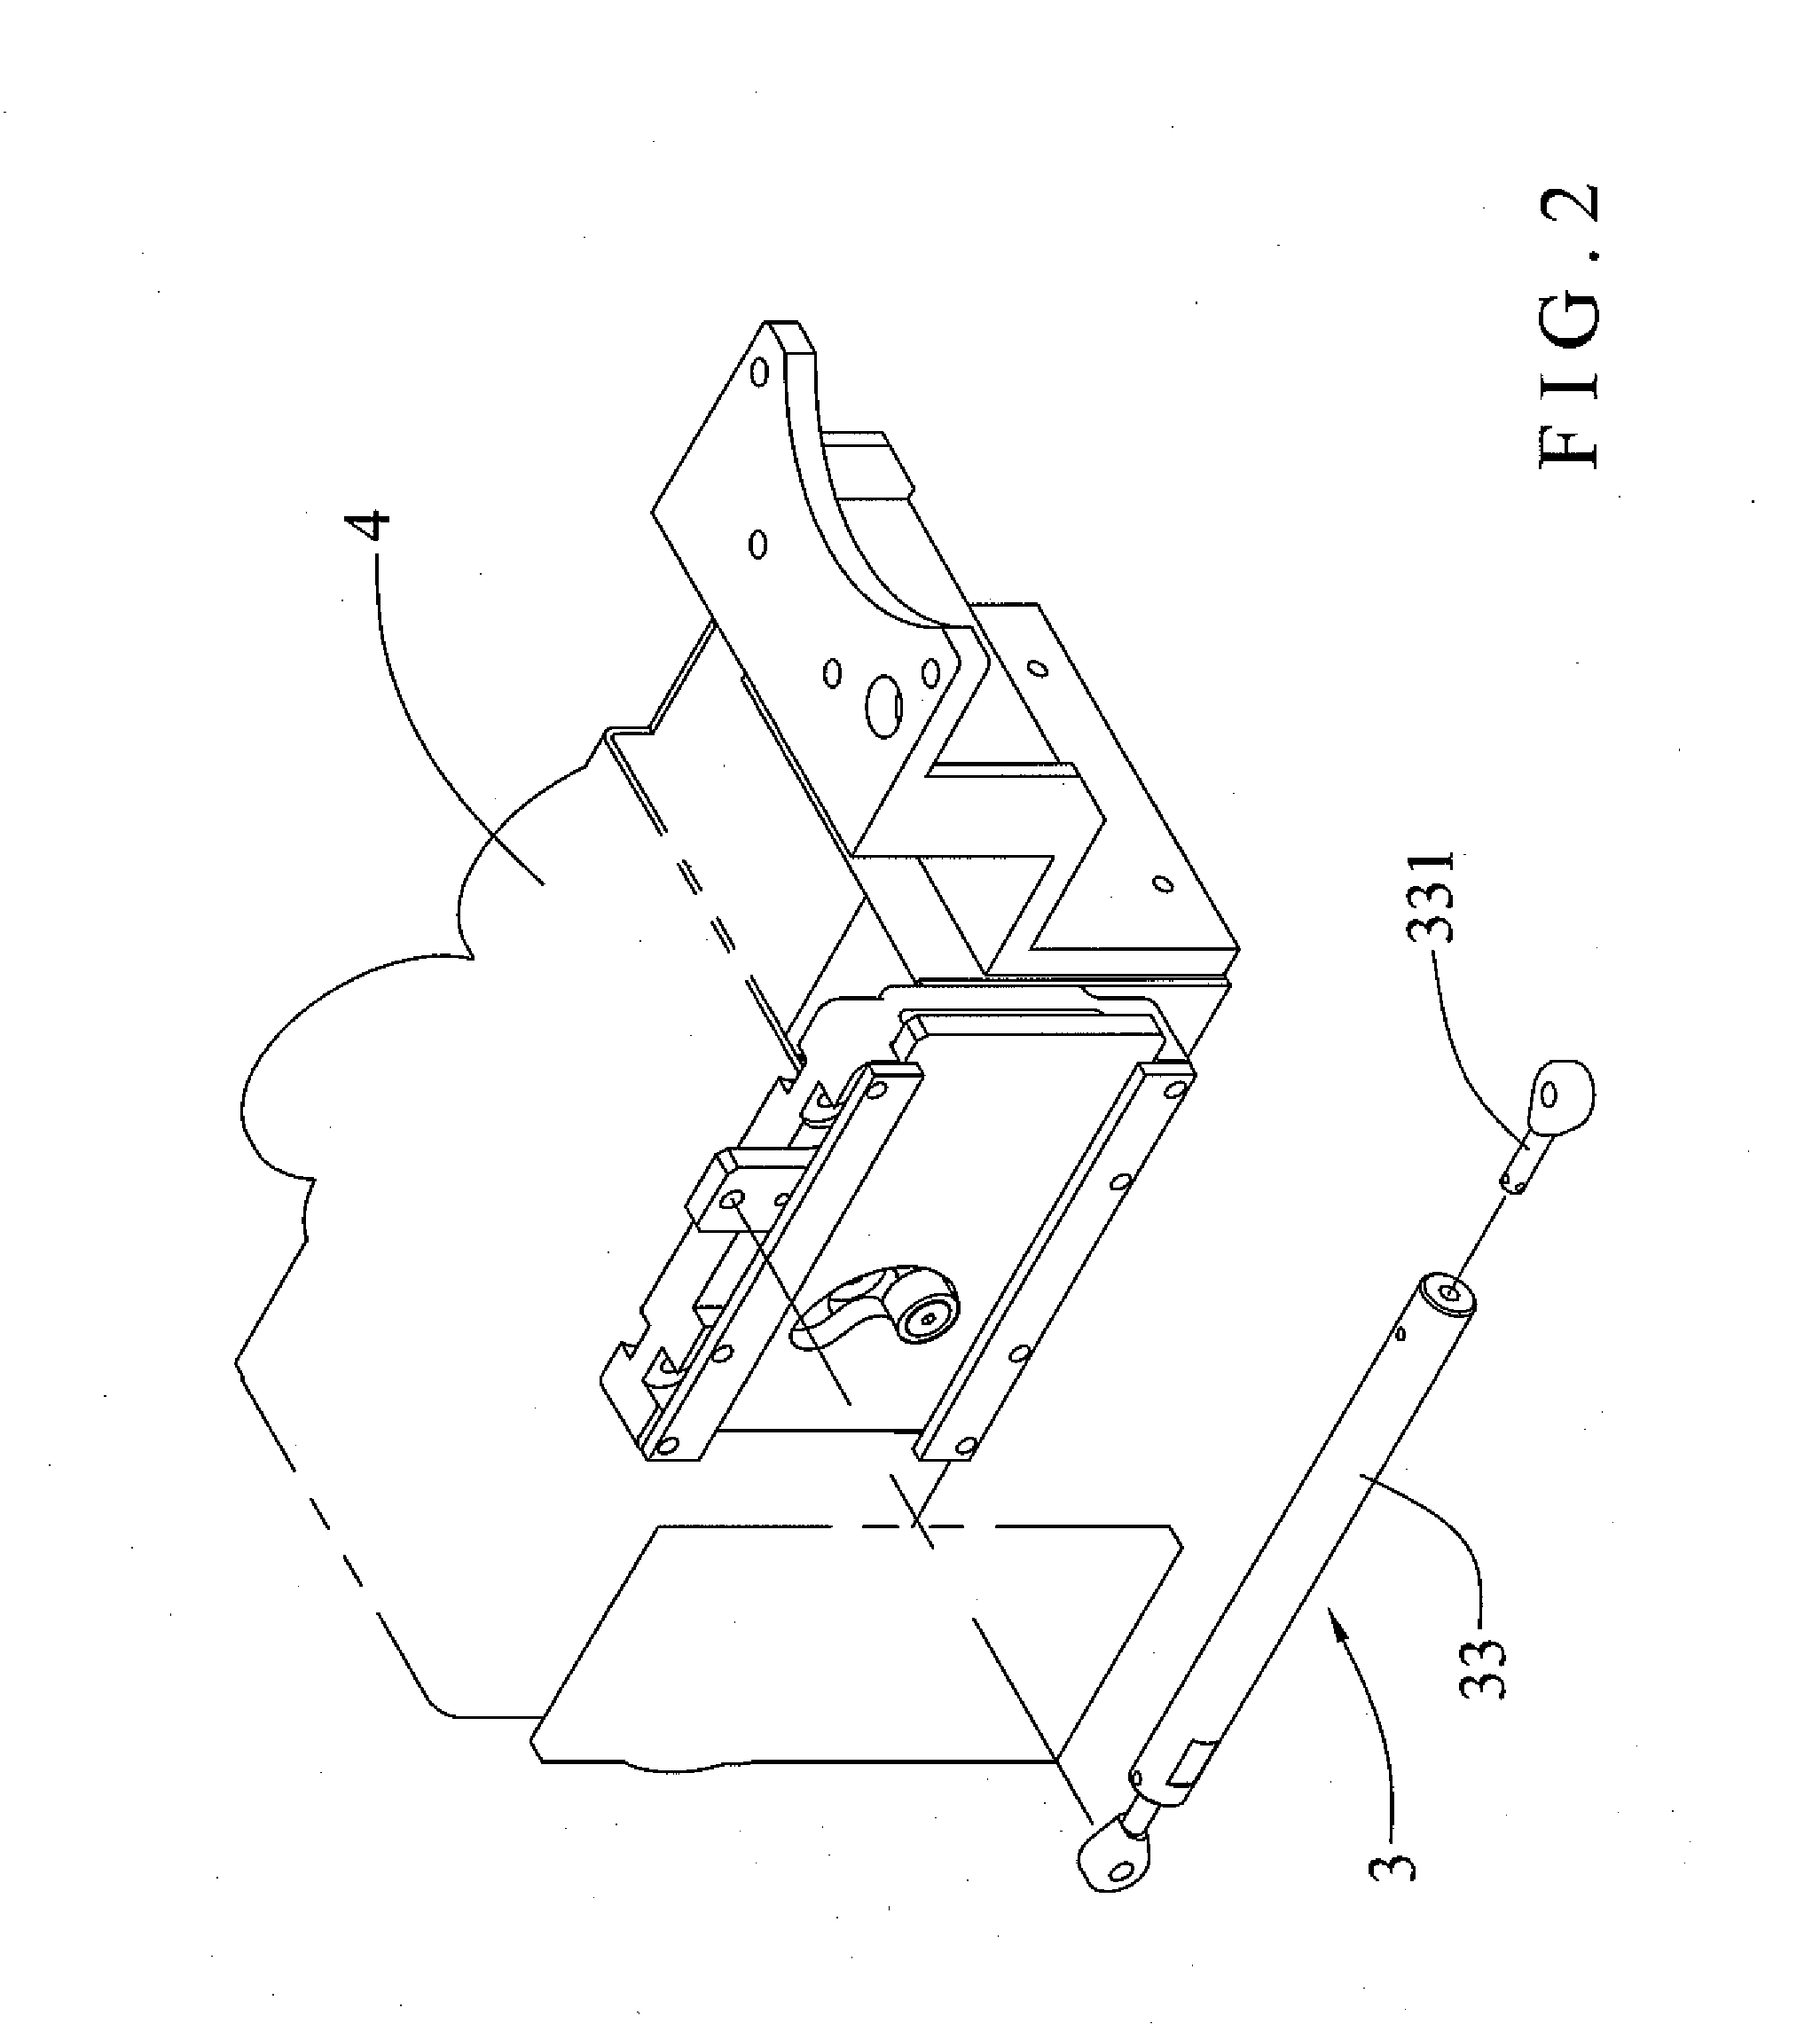 Food Processor Cutting Device Having a Position Adjustment Function